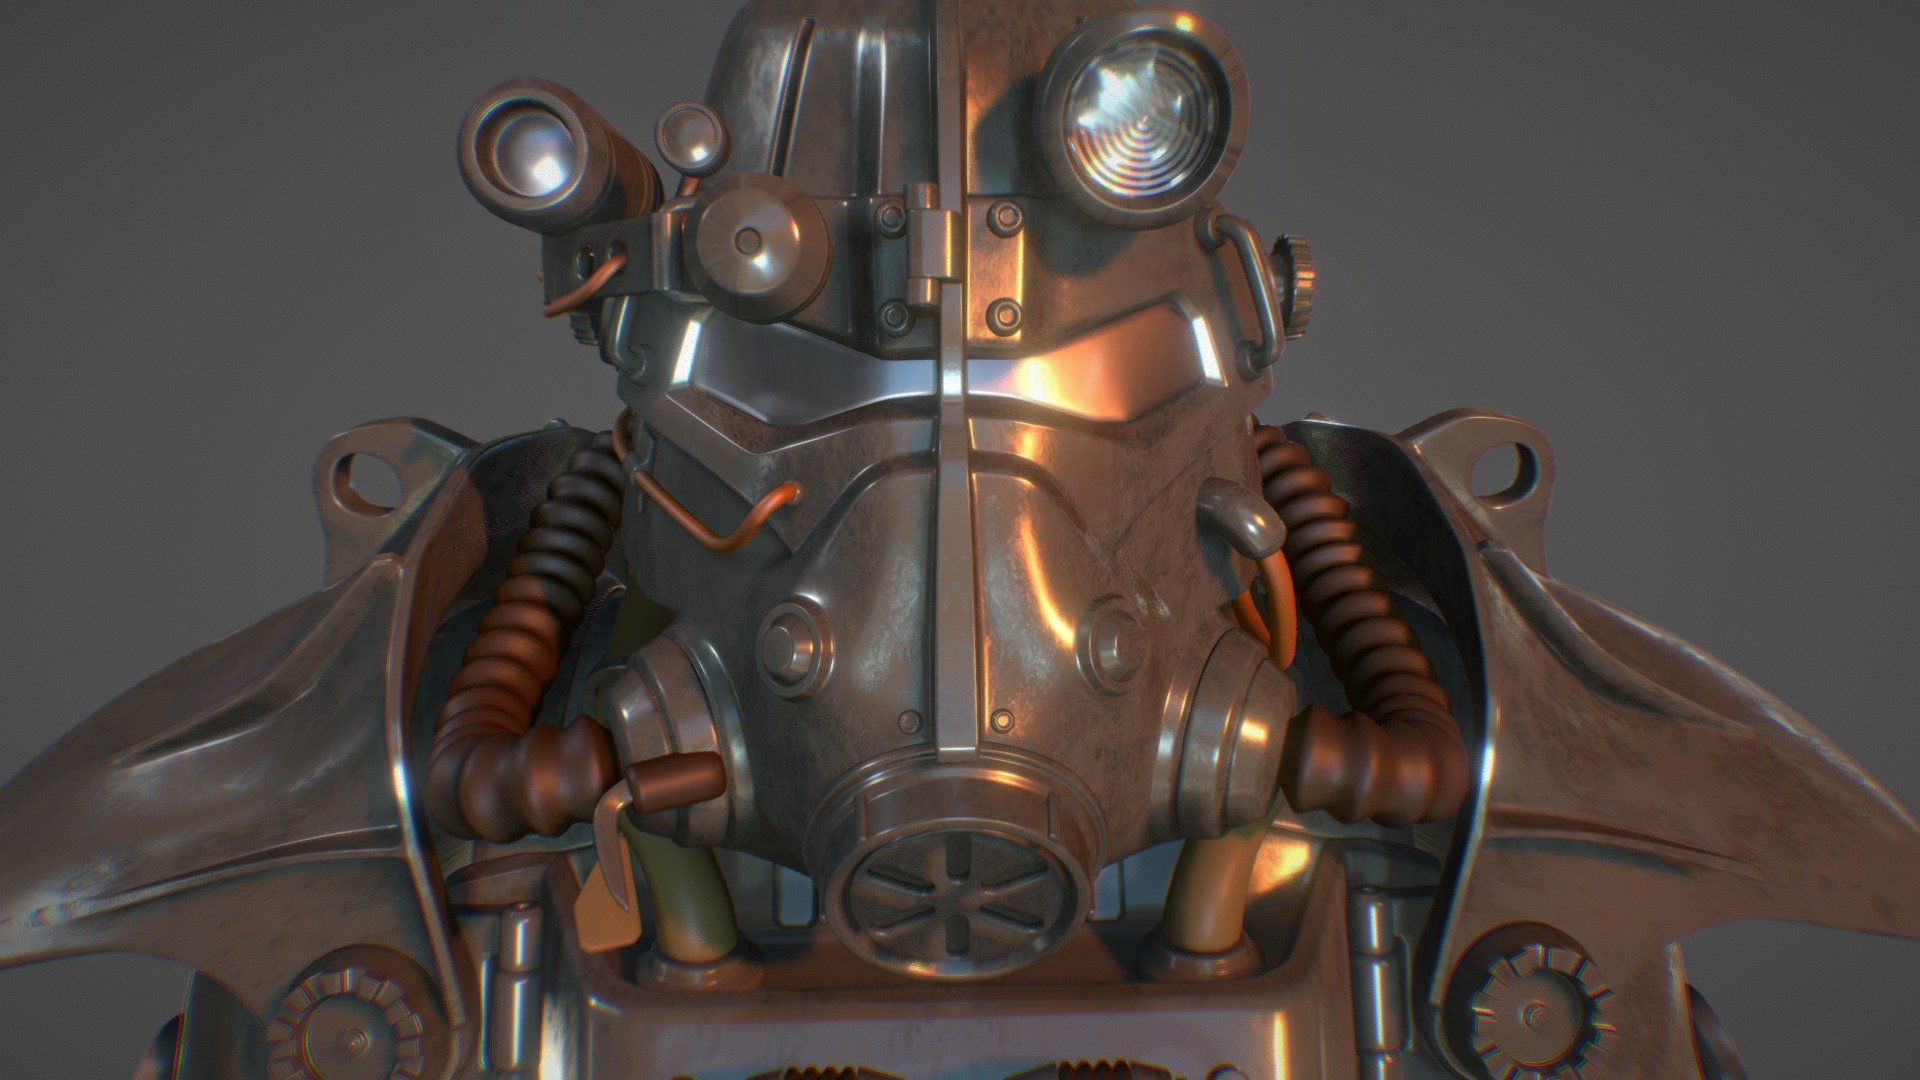 Fallout T 45d Power Armor For Cosplay Buy Royalty Free 3d Model By Moon Dong Hwa Moondonghwa 6f3e9f8